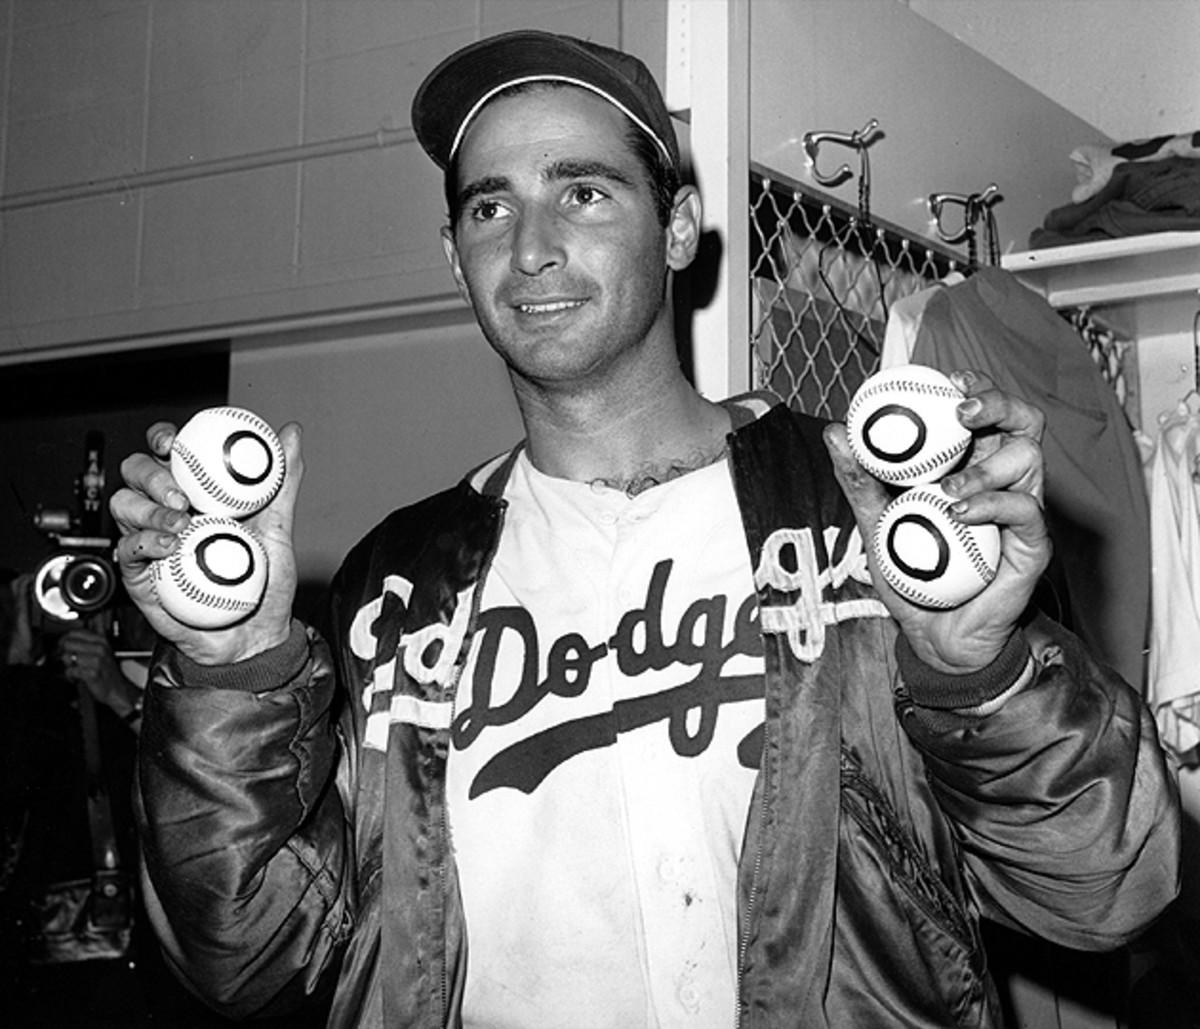 With a perfect game vs. the Cubs on Sept. 10, 1965, Koufax became the first pitcher with four no-hitters.